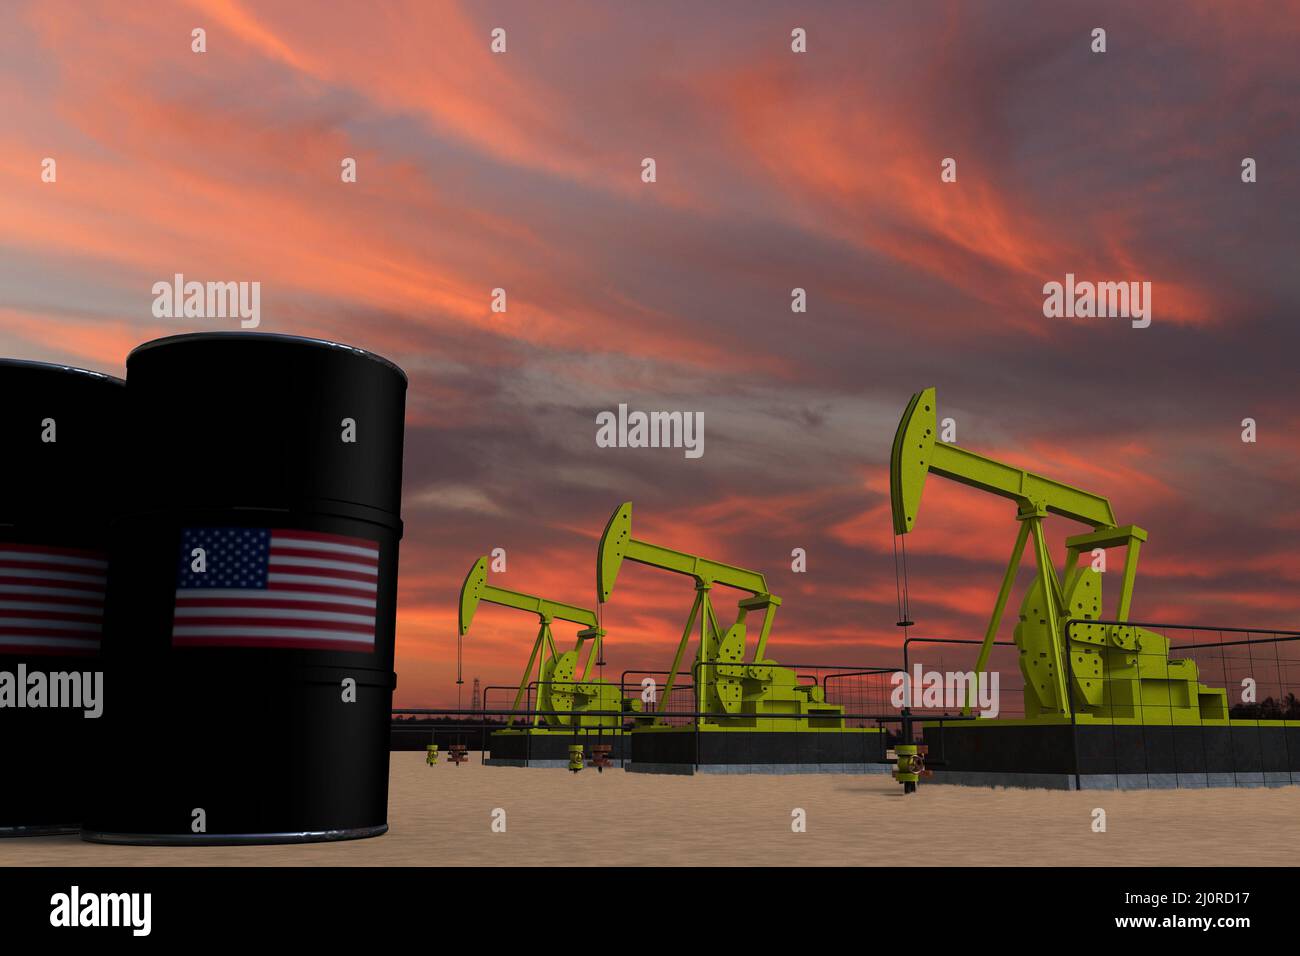 Nice pumpjack oil extraction and cloudy sky in sunset with the UNITED STATES OF AMERICA USA flag on oil barrels 3D rendering Stock Photo